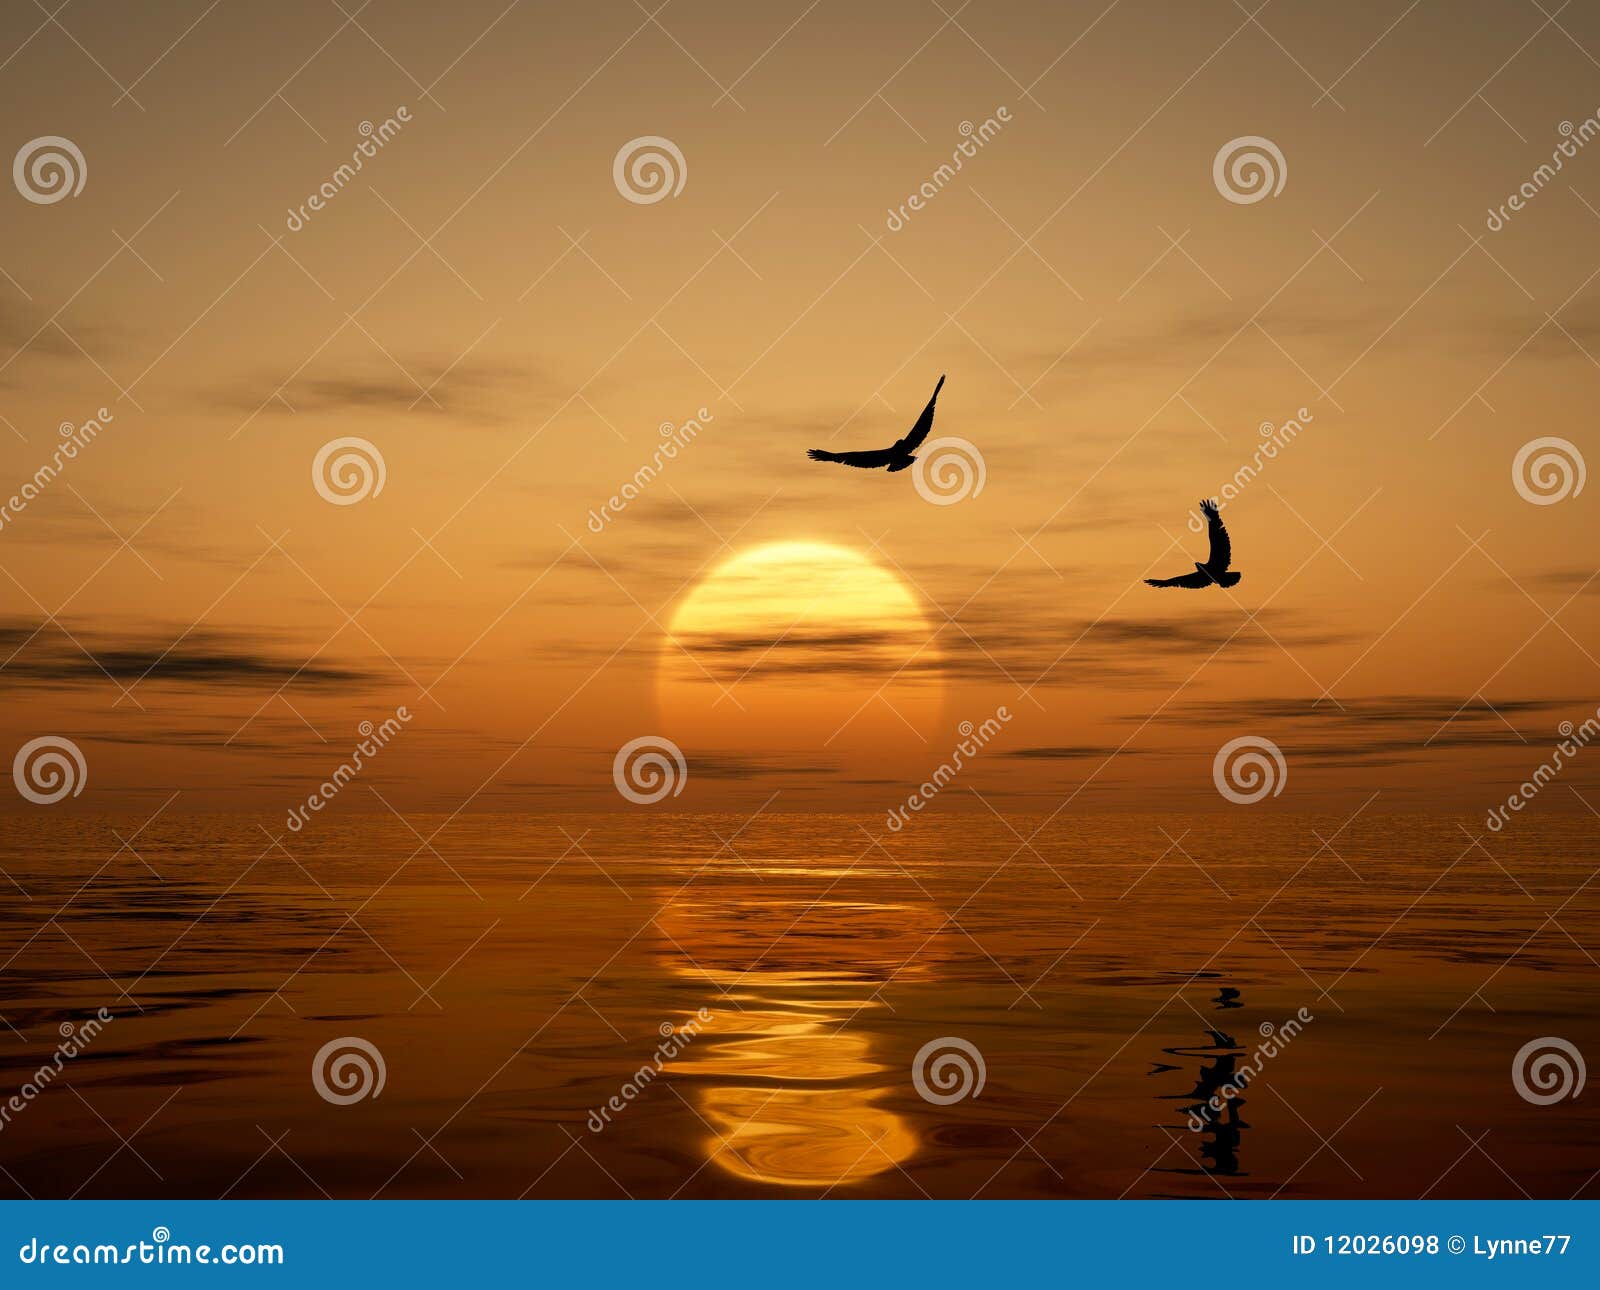 golden sunset with eagles